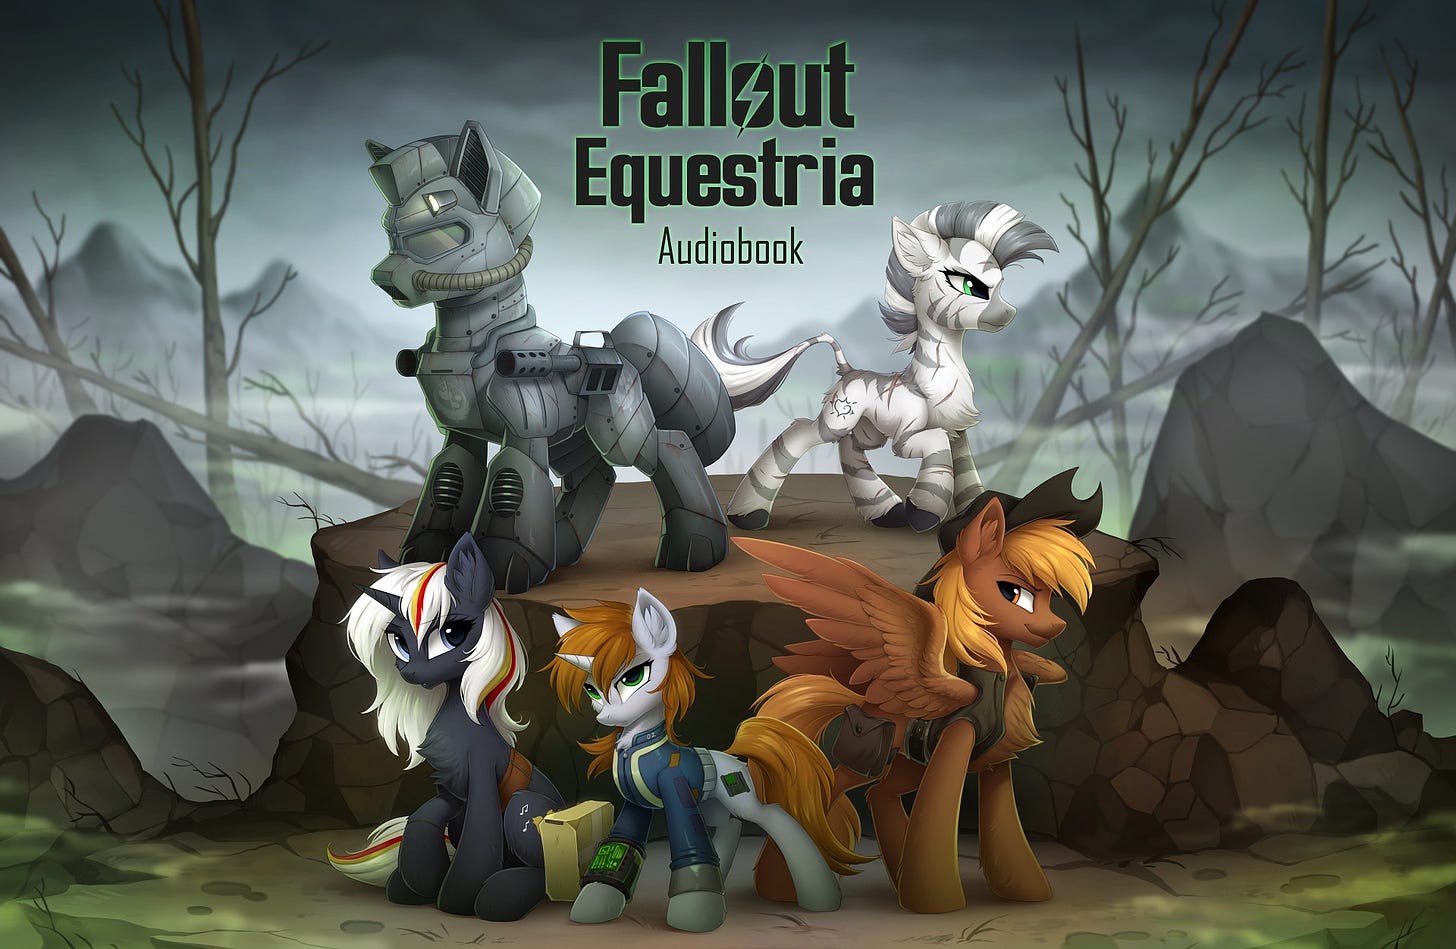 Equestria Daily - MLP Stuff!: The Full Fallout Equestria Audio Book Project  is Now Complete